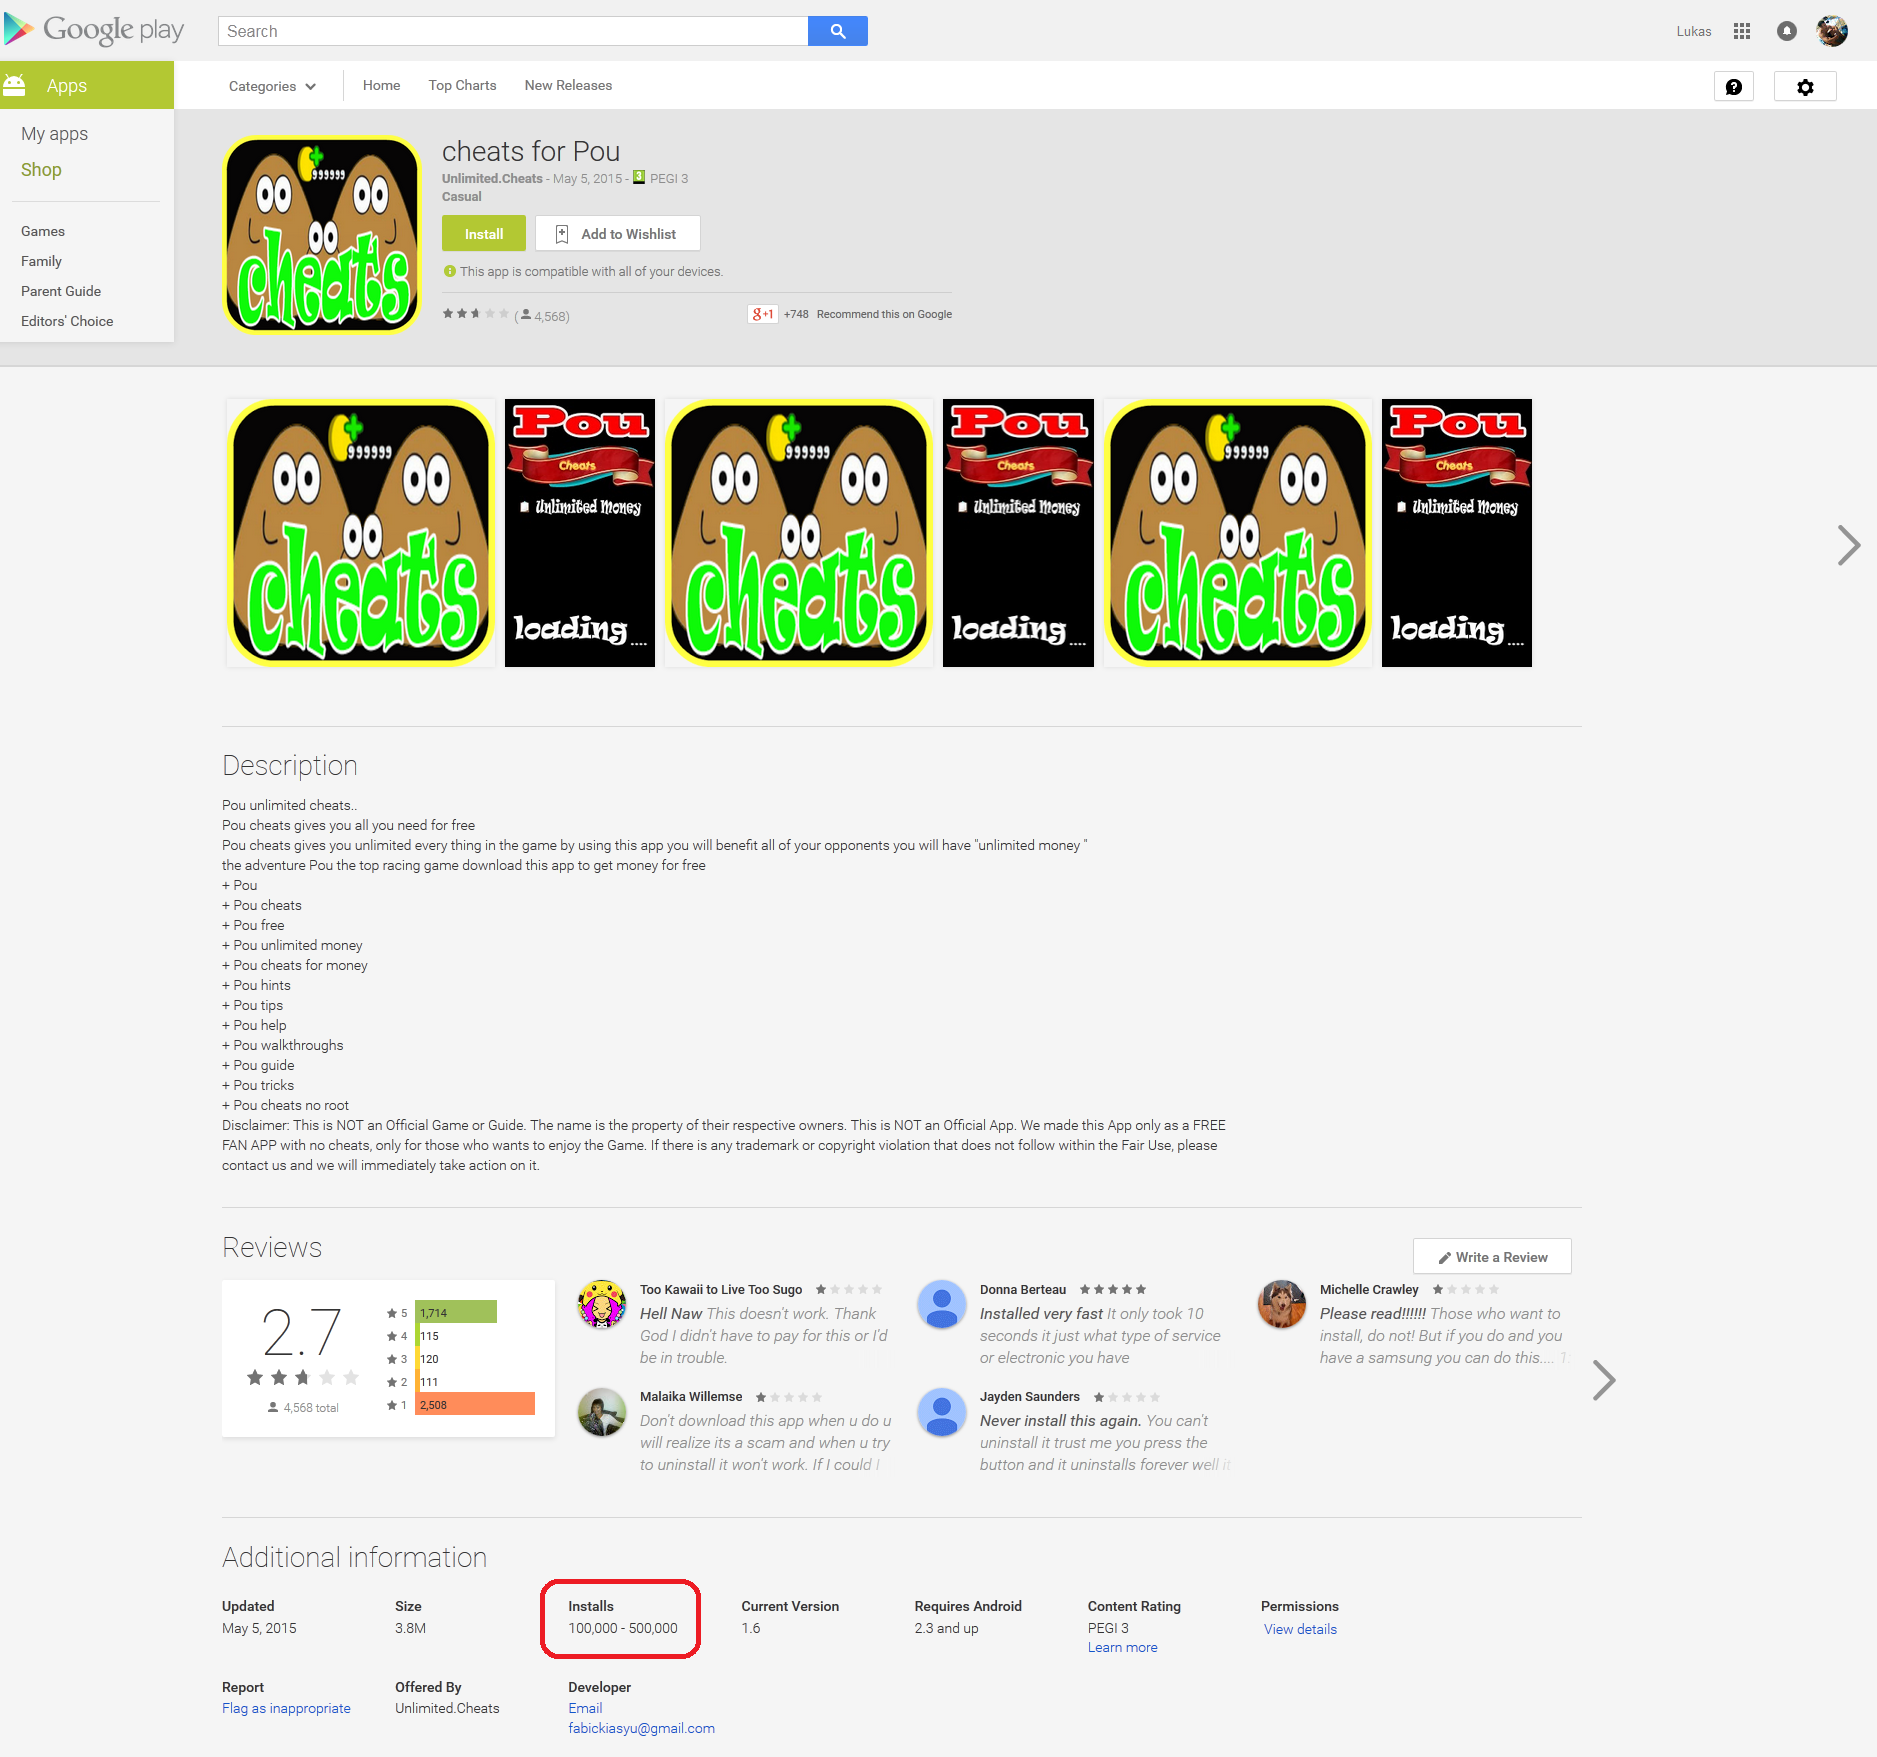 Figure 1: Malicious ‘Cheats for Pou’ from Google Play Store